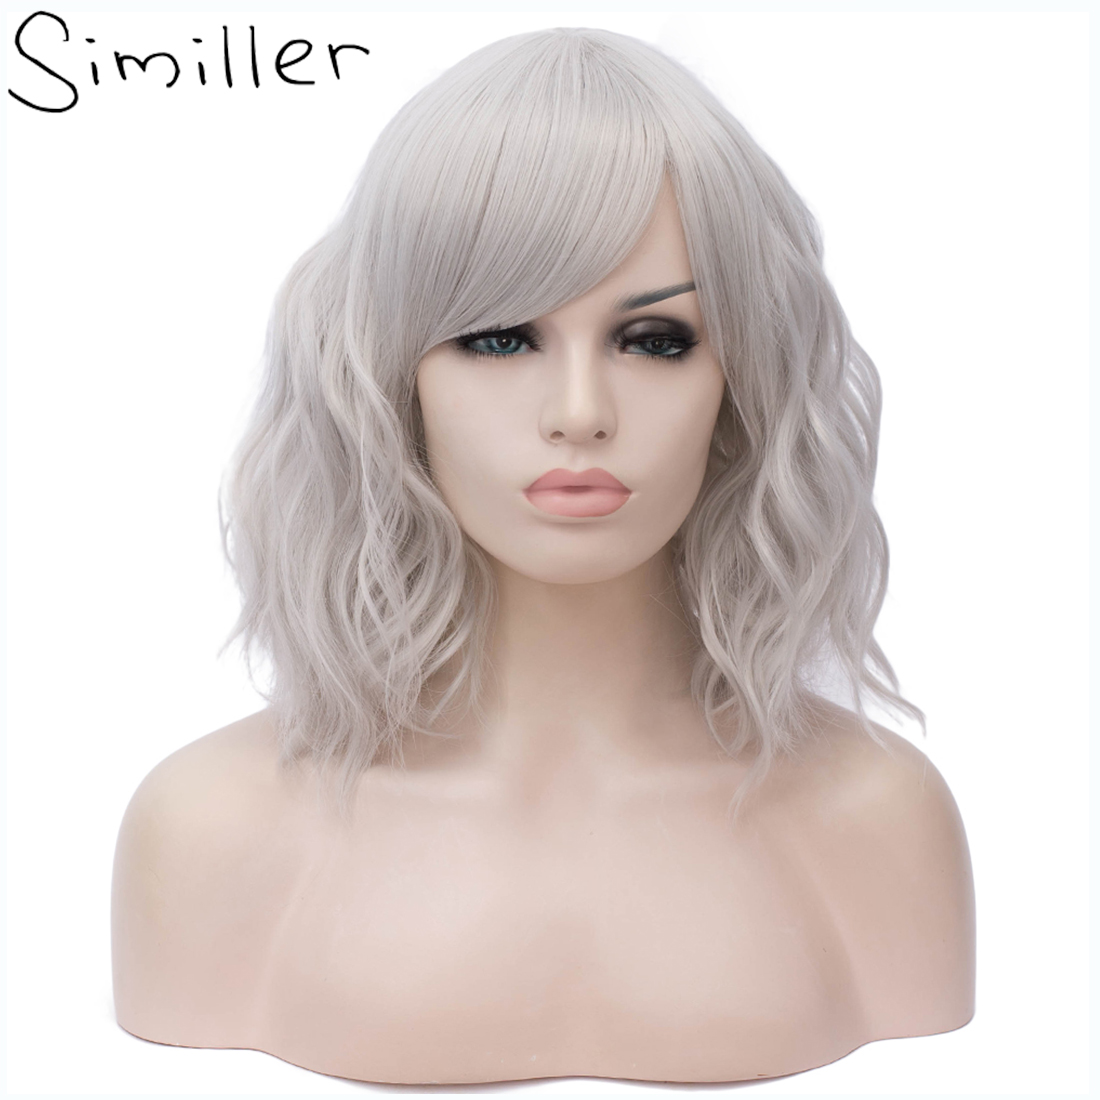 Similler Short Synthetic Wigs for Women Curly Hair..